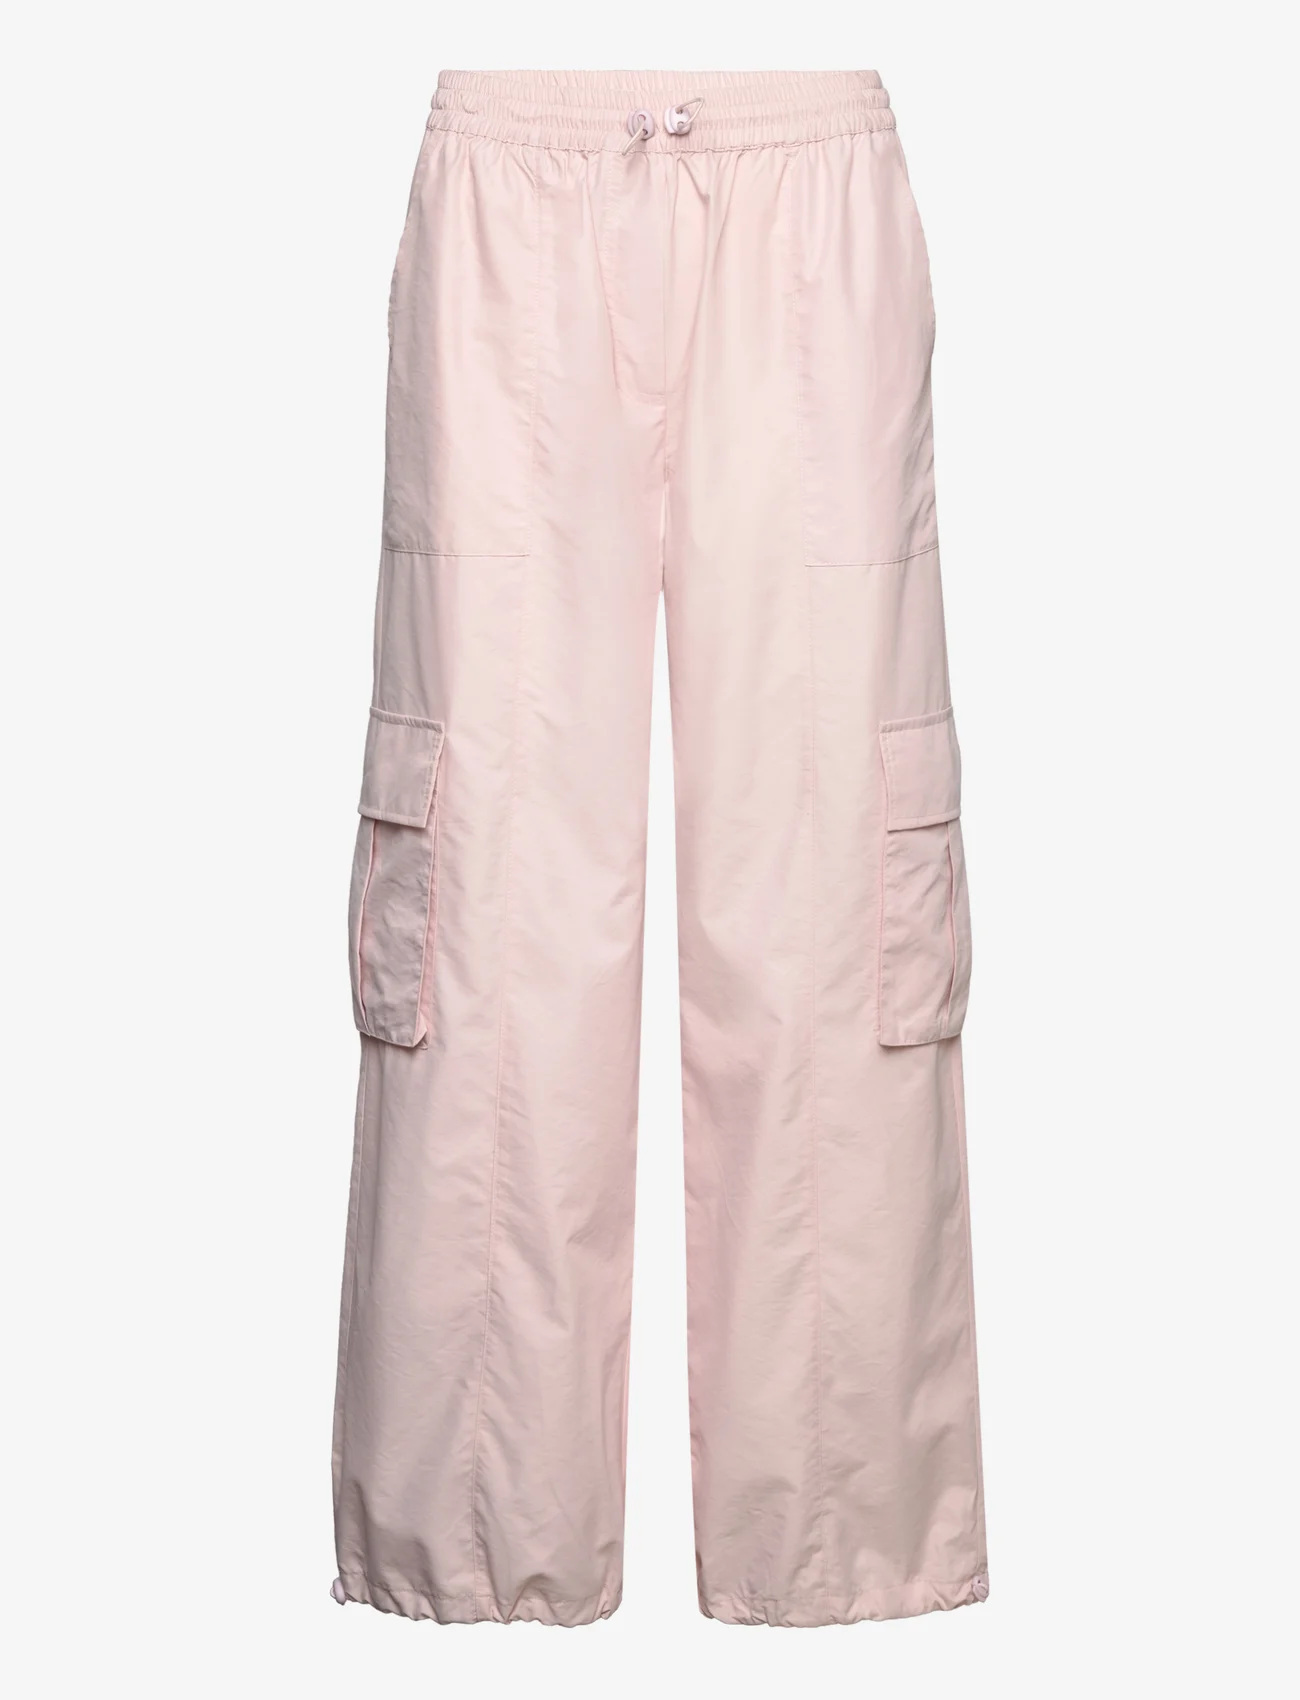 A-View - Cargo pants - cargobyxor - rose - 0